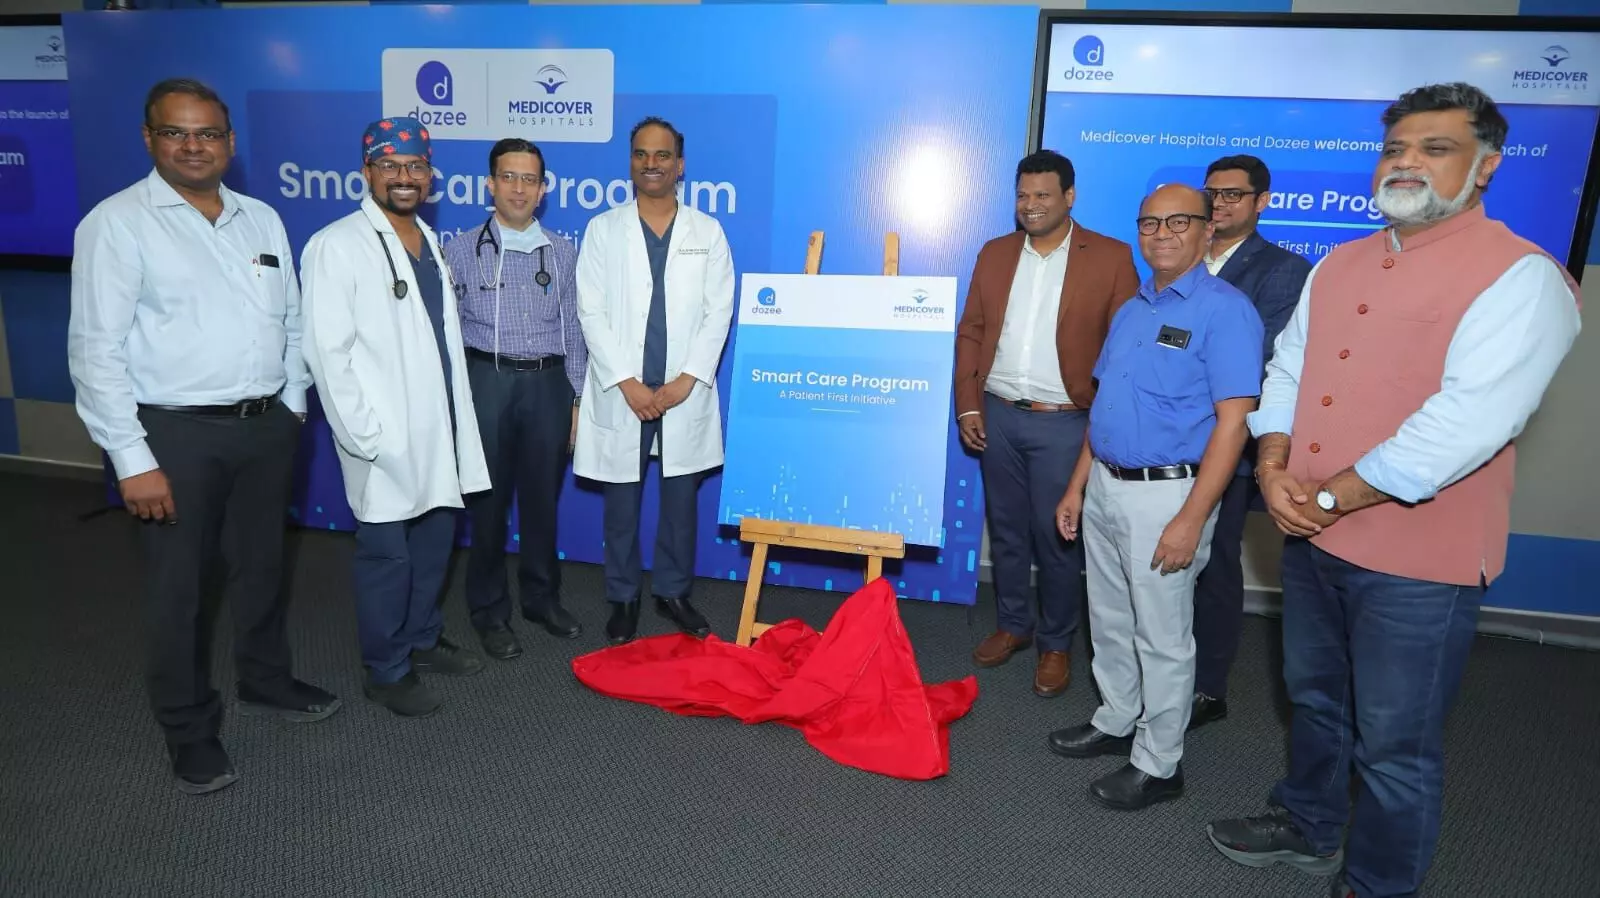 Medicover Hospitals introduces Smartcare initiative with Dozee for enhanced patient safety